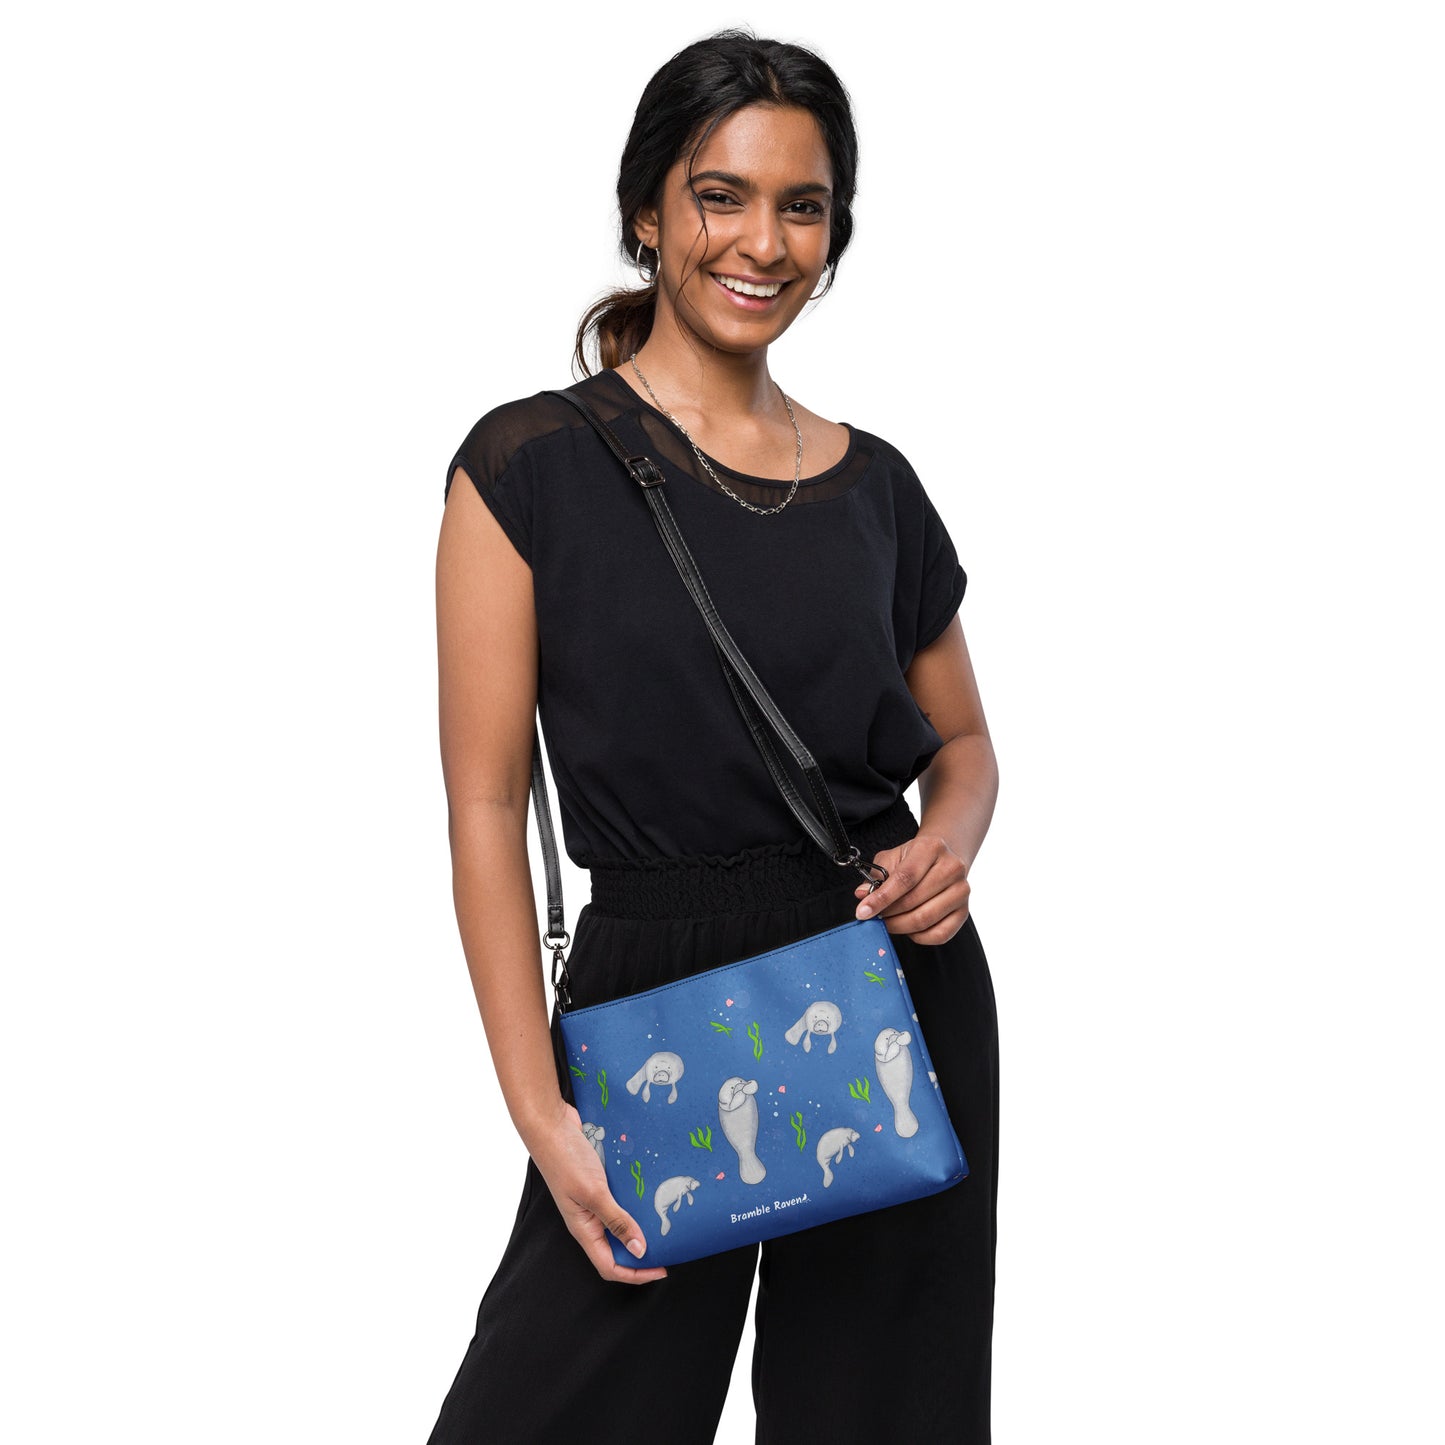 Manatee crossbody bag. Faux leather with polyester lining and dark grey hardware. Comes with adjustable removable wrist and shoulder straps. Front view of bag with manatees on a dark blue background. Shown on shoulder of female model.